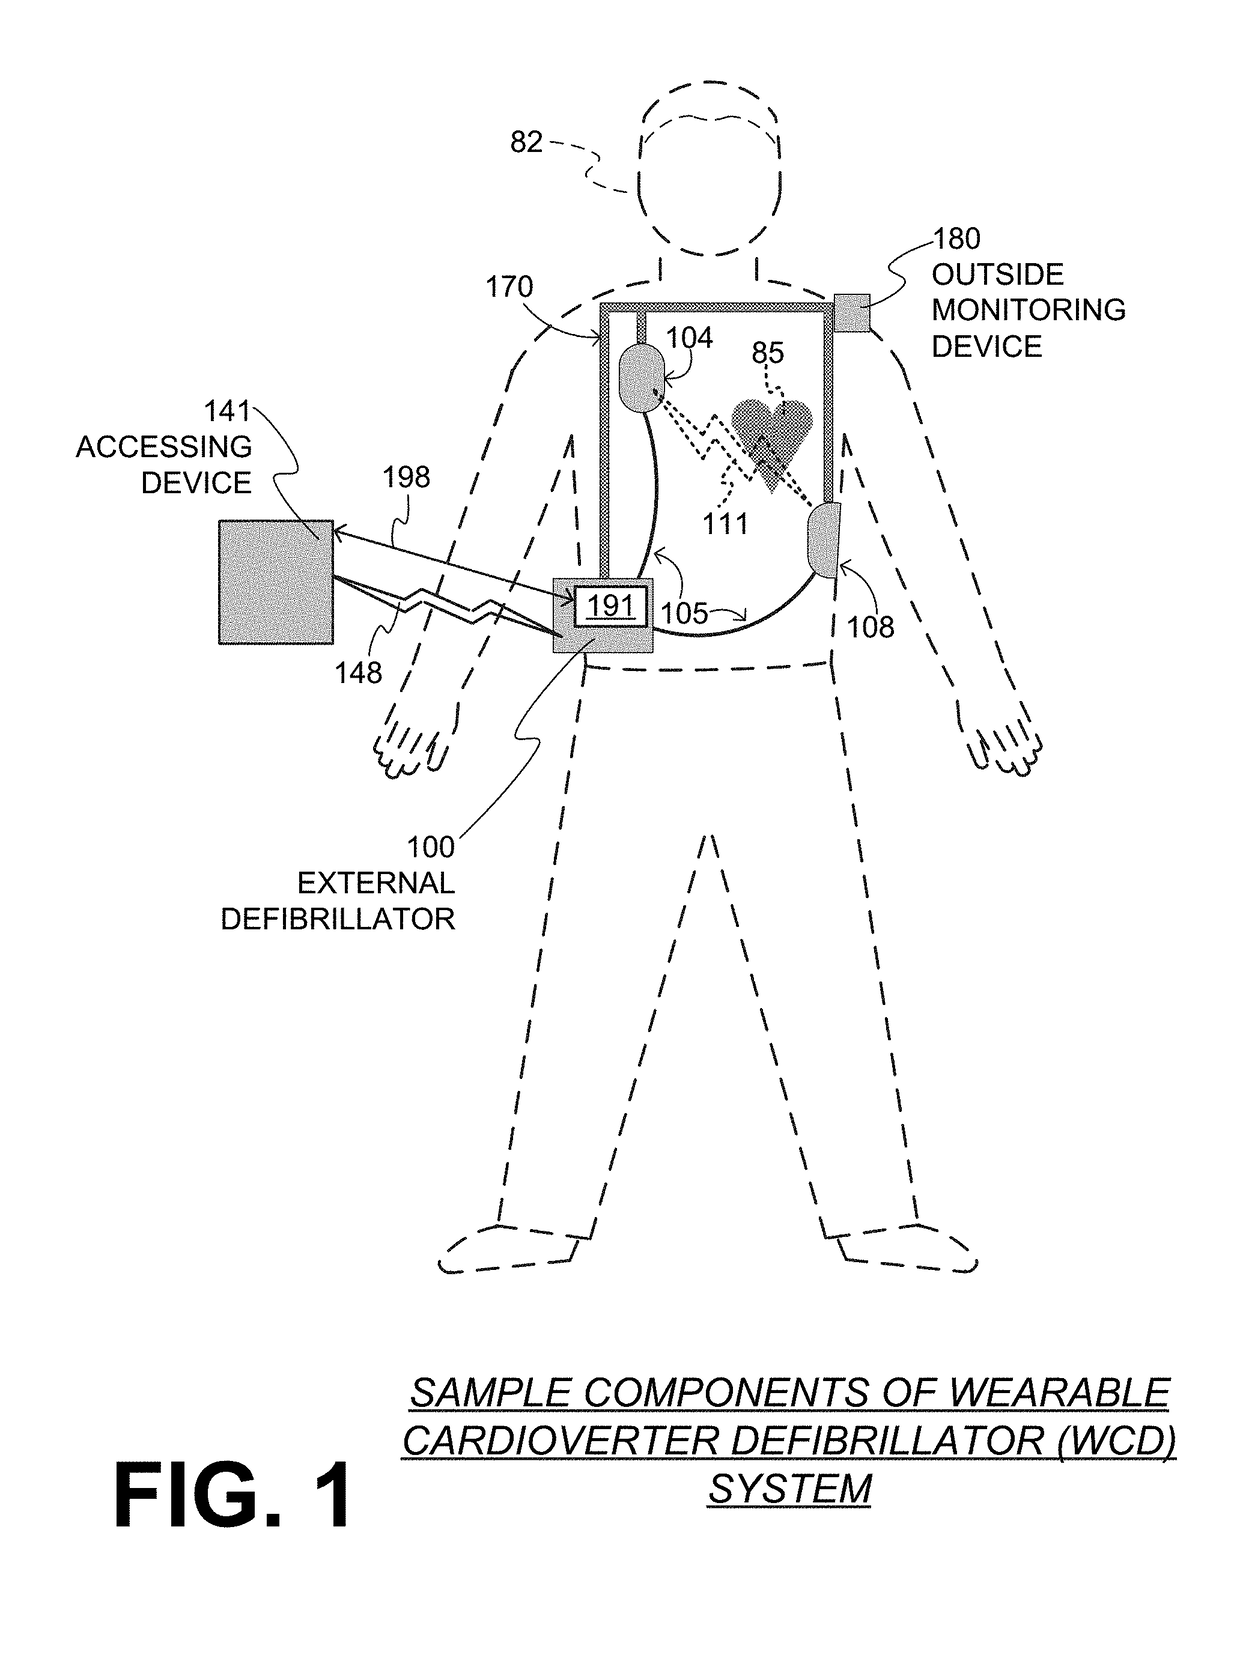 Wearable cardioverter defibrillator (WCD) system using security NFC tag for uploading configuration data